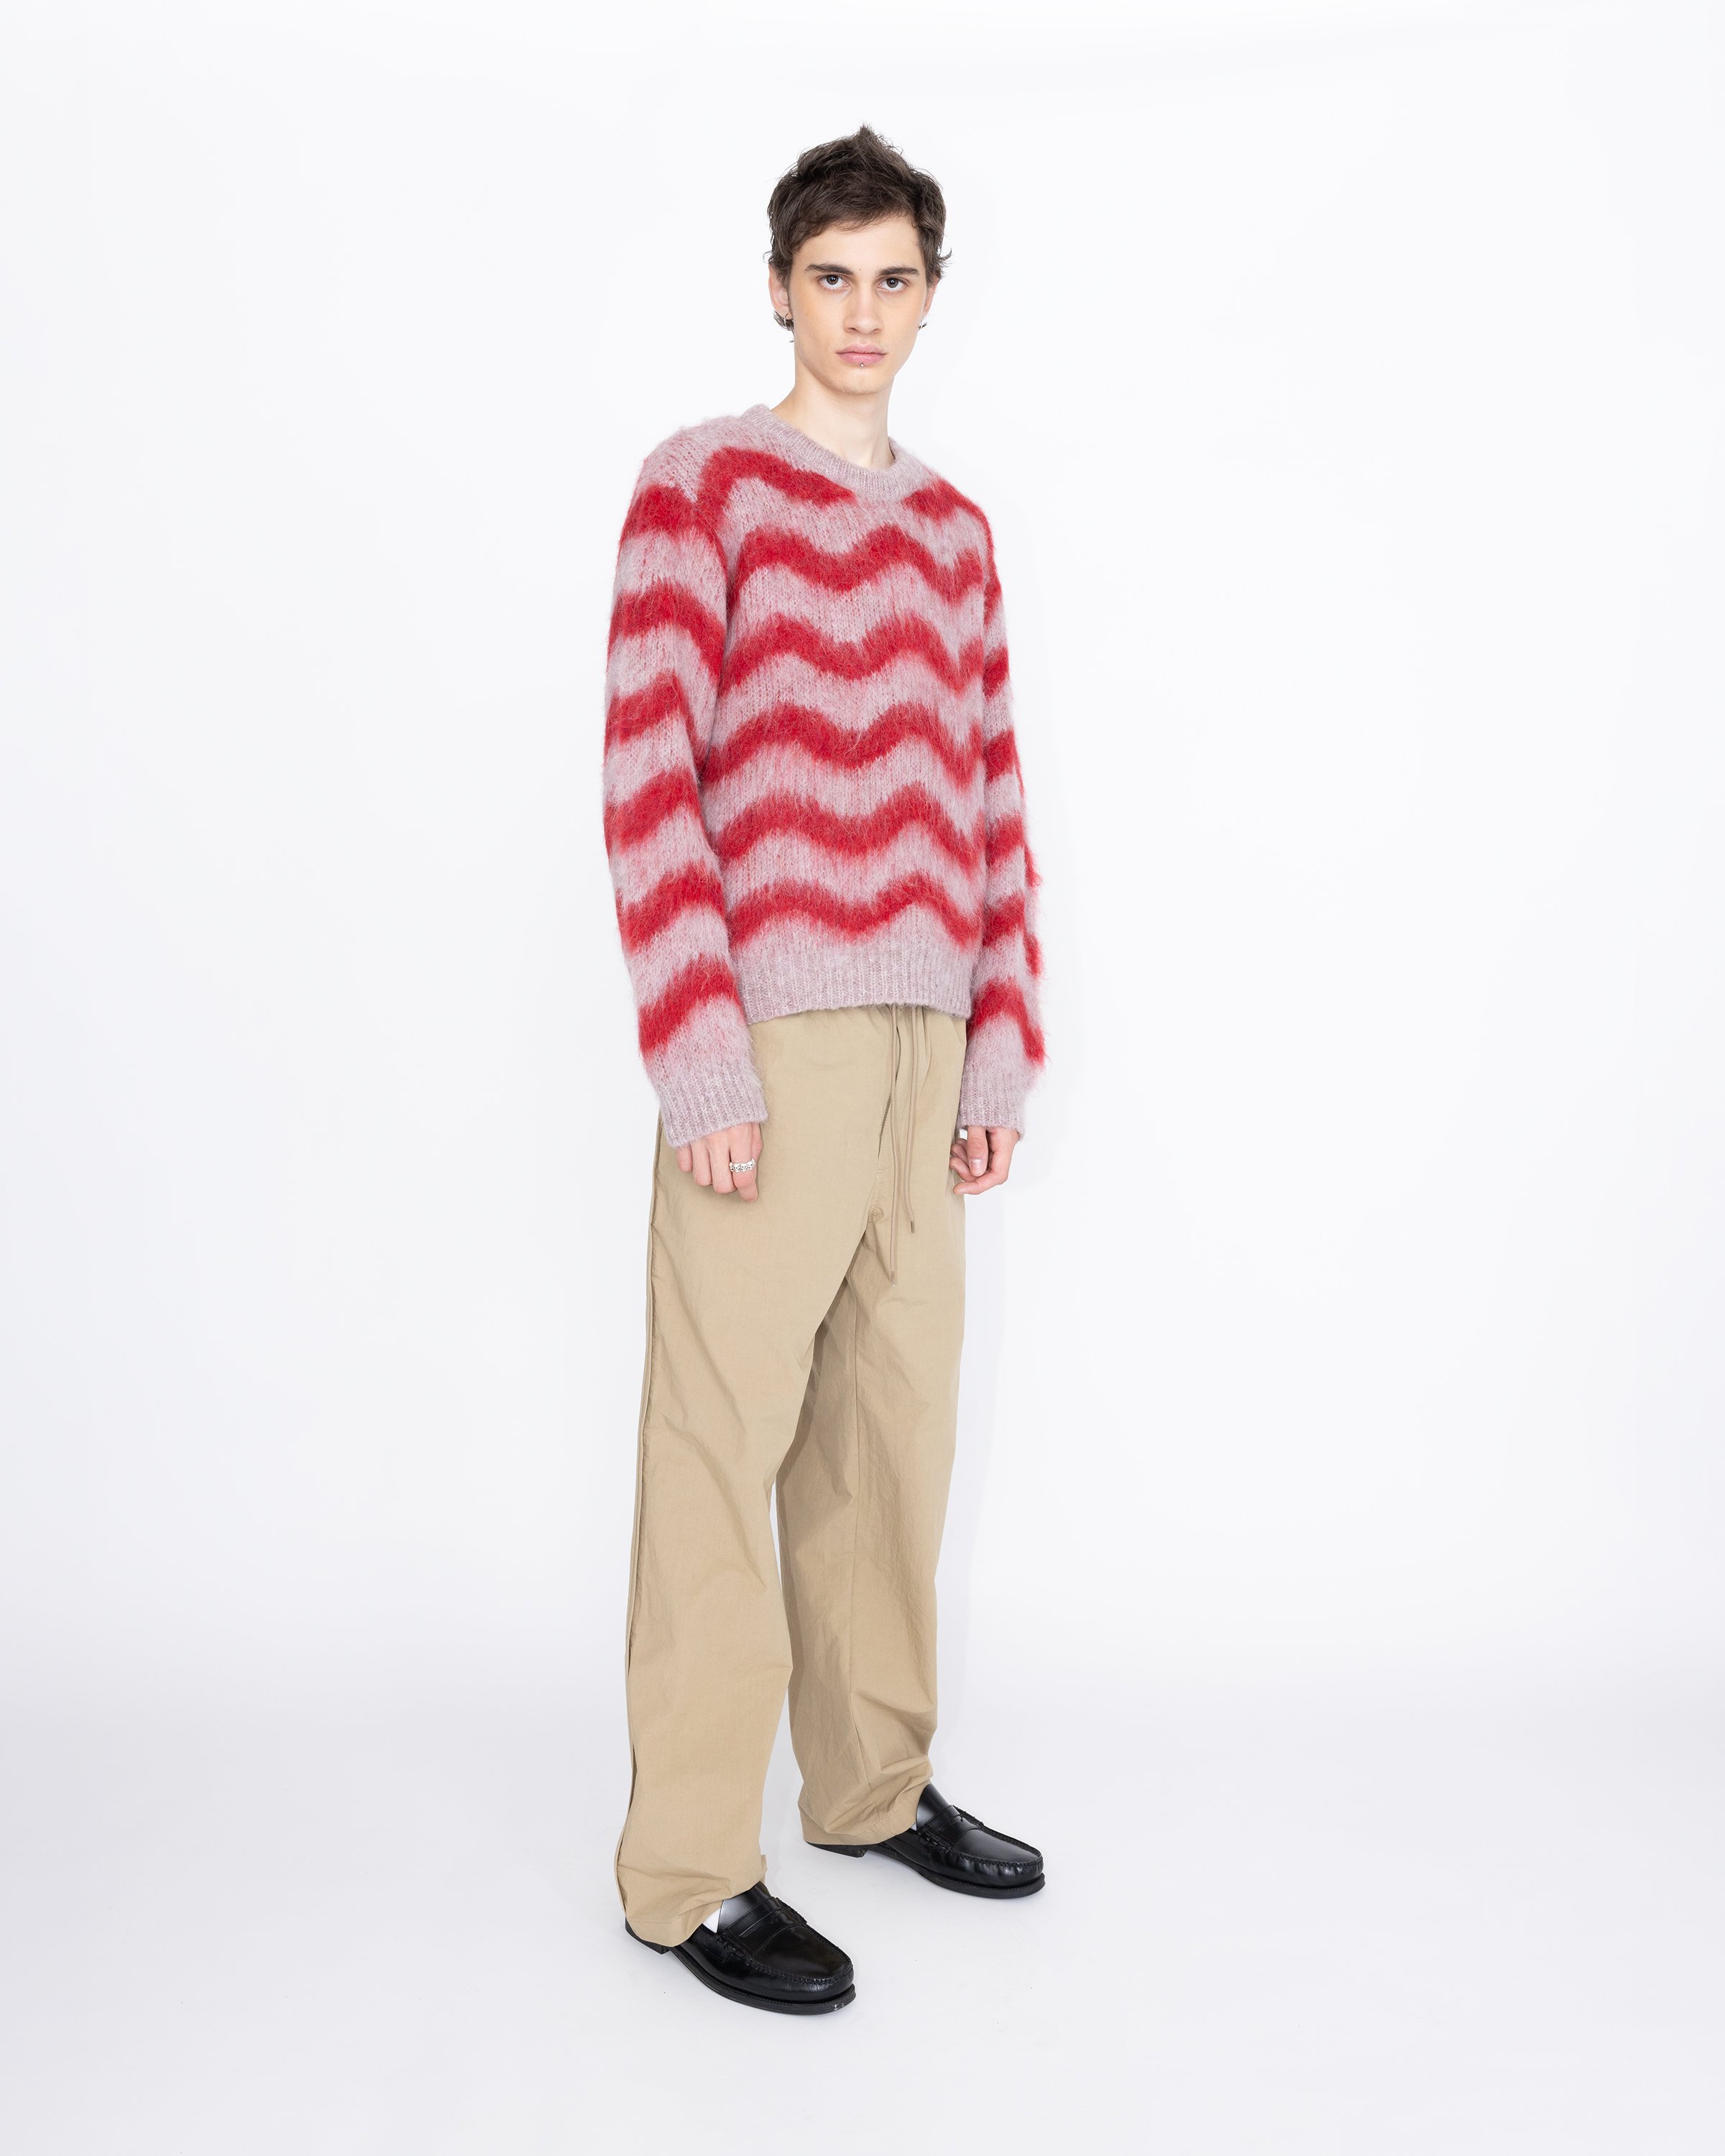 Highsnobiety HS05 - Alpaca Fuzzy Wave Sweater Pale Rose/Red - Clothing - Multi - Image 4